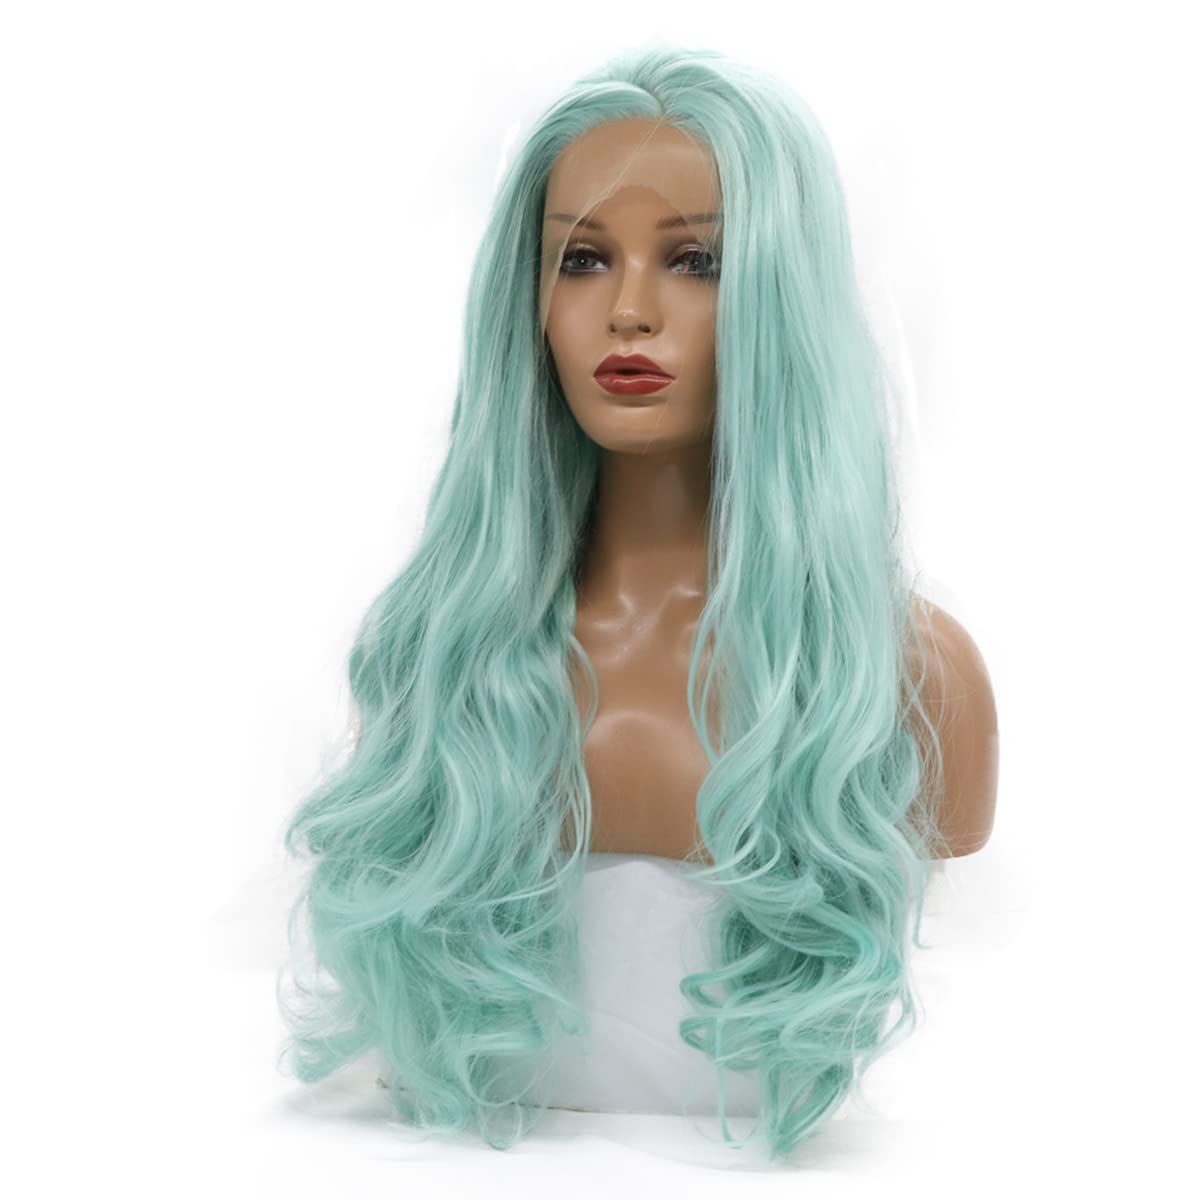 Unleash Your Inner Magic with our Mint Lace Front Wig - A Refreshing Style Statement!